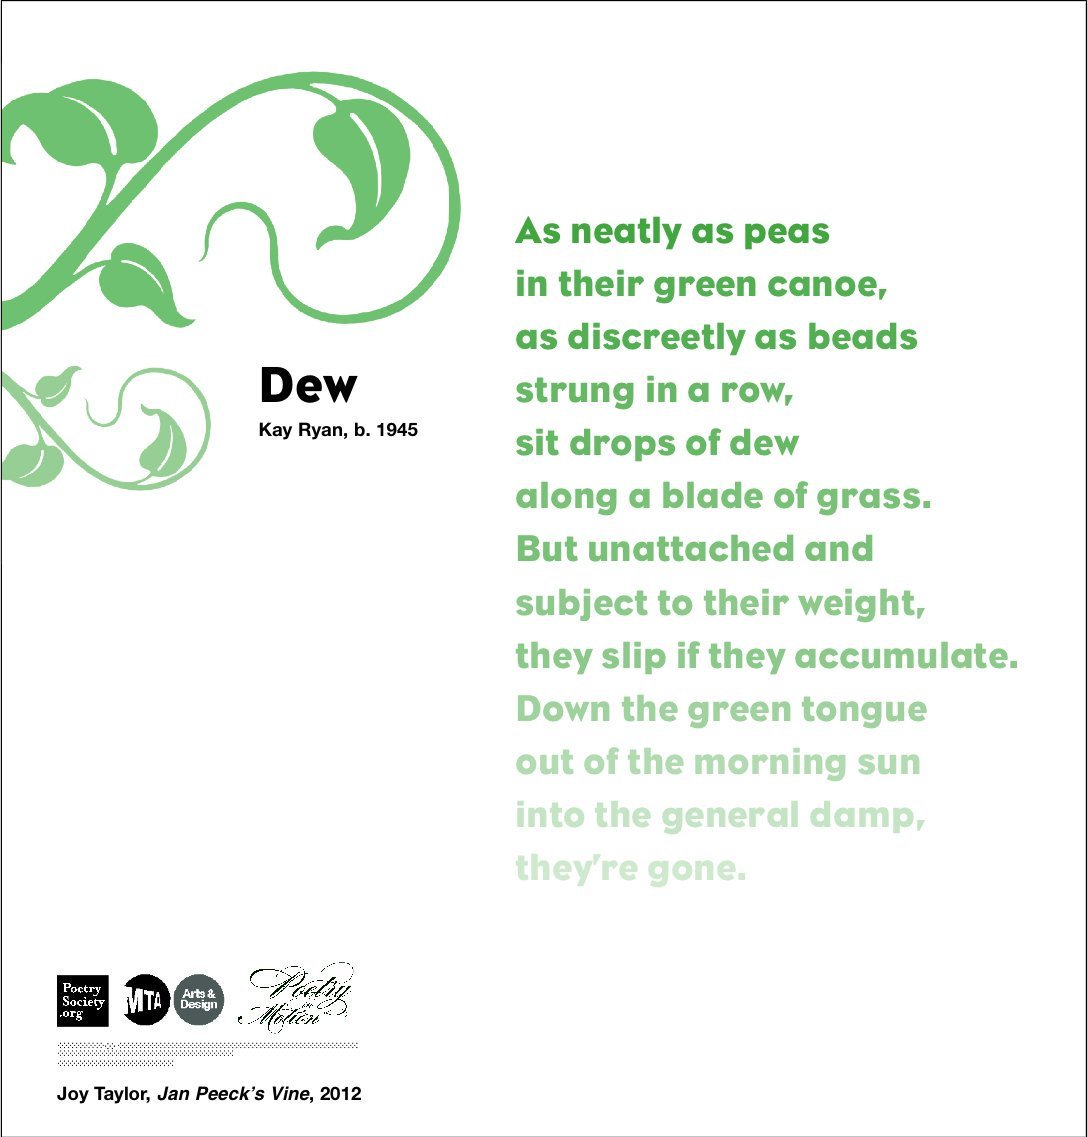 A White poster with a leafy green vine sprouting from the left side. To the right is a poem in green text titled Dew, by Kay Ryan.